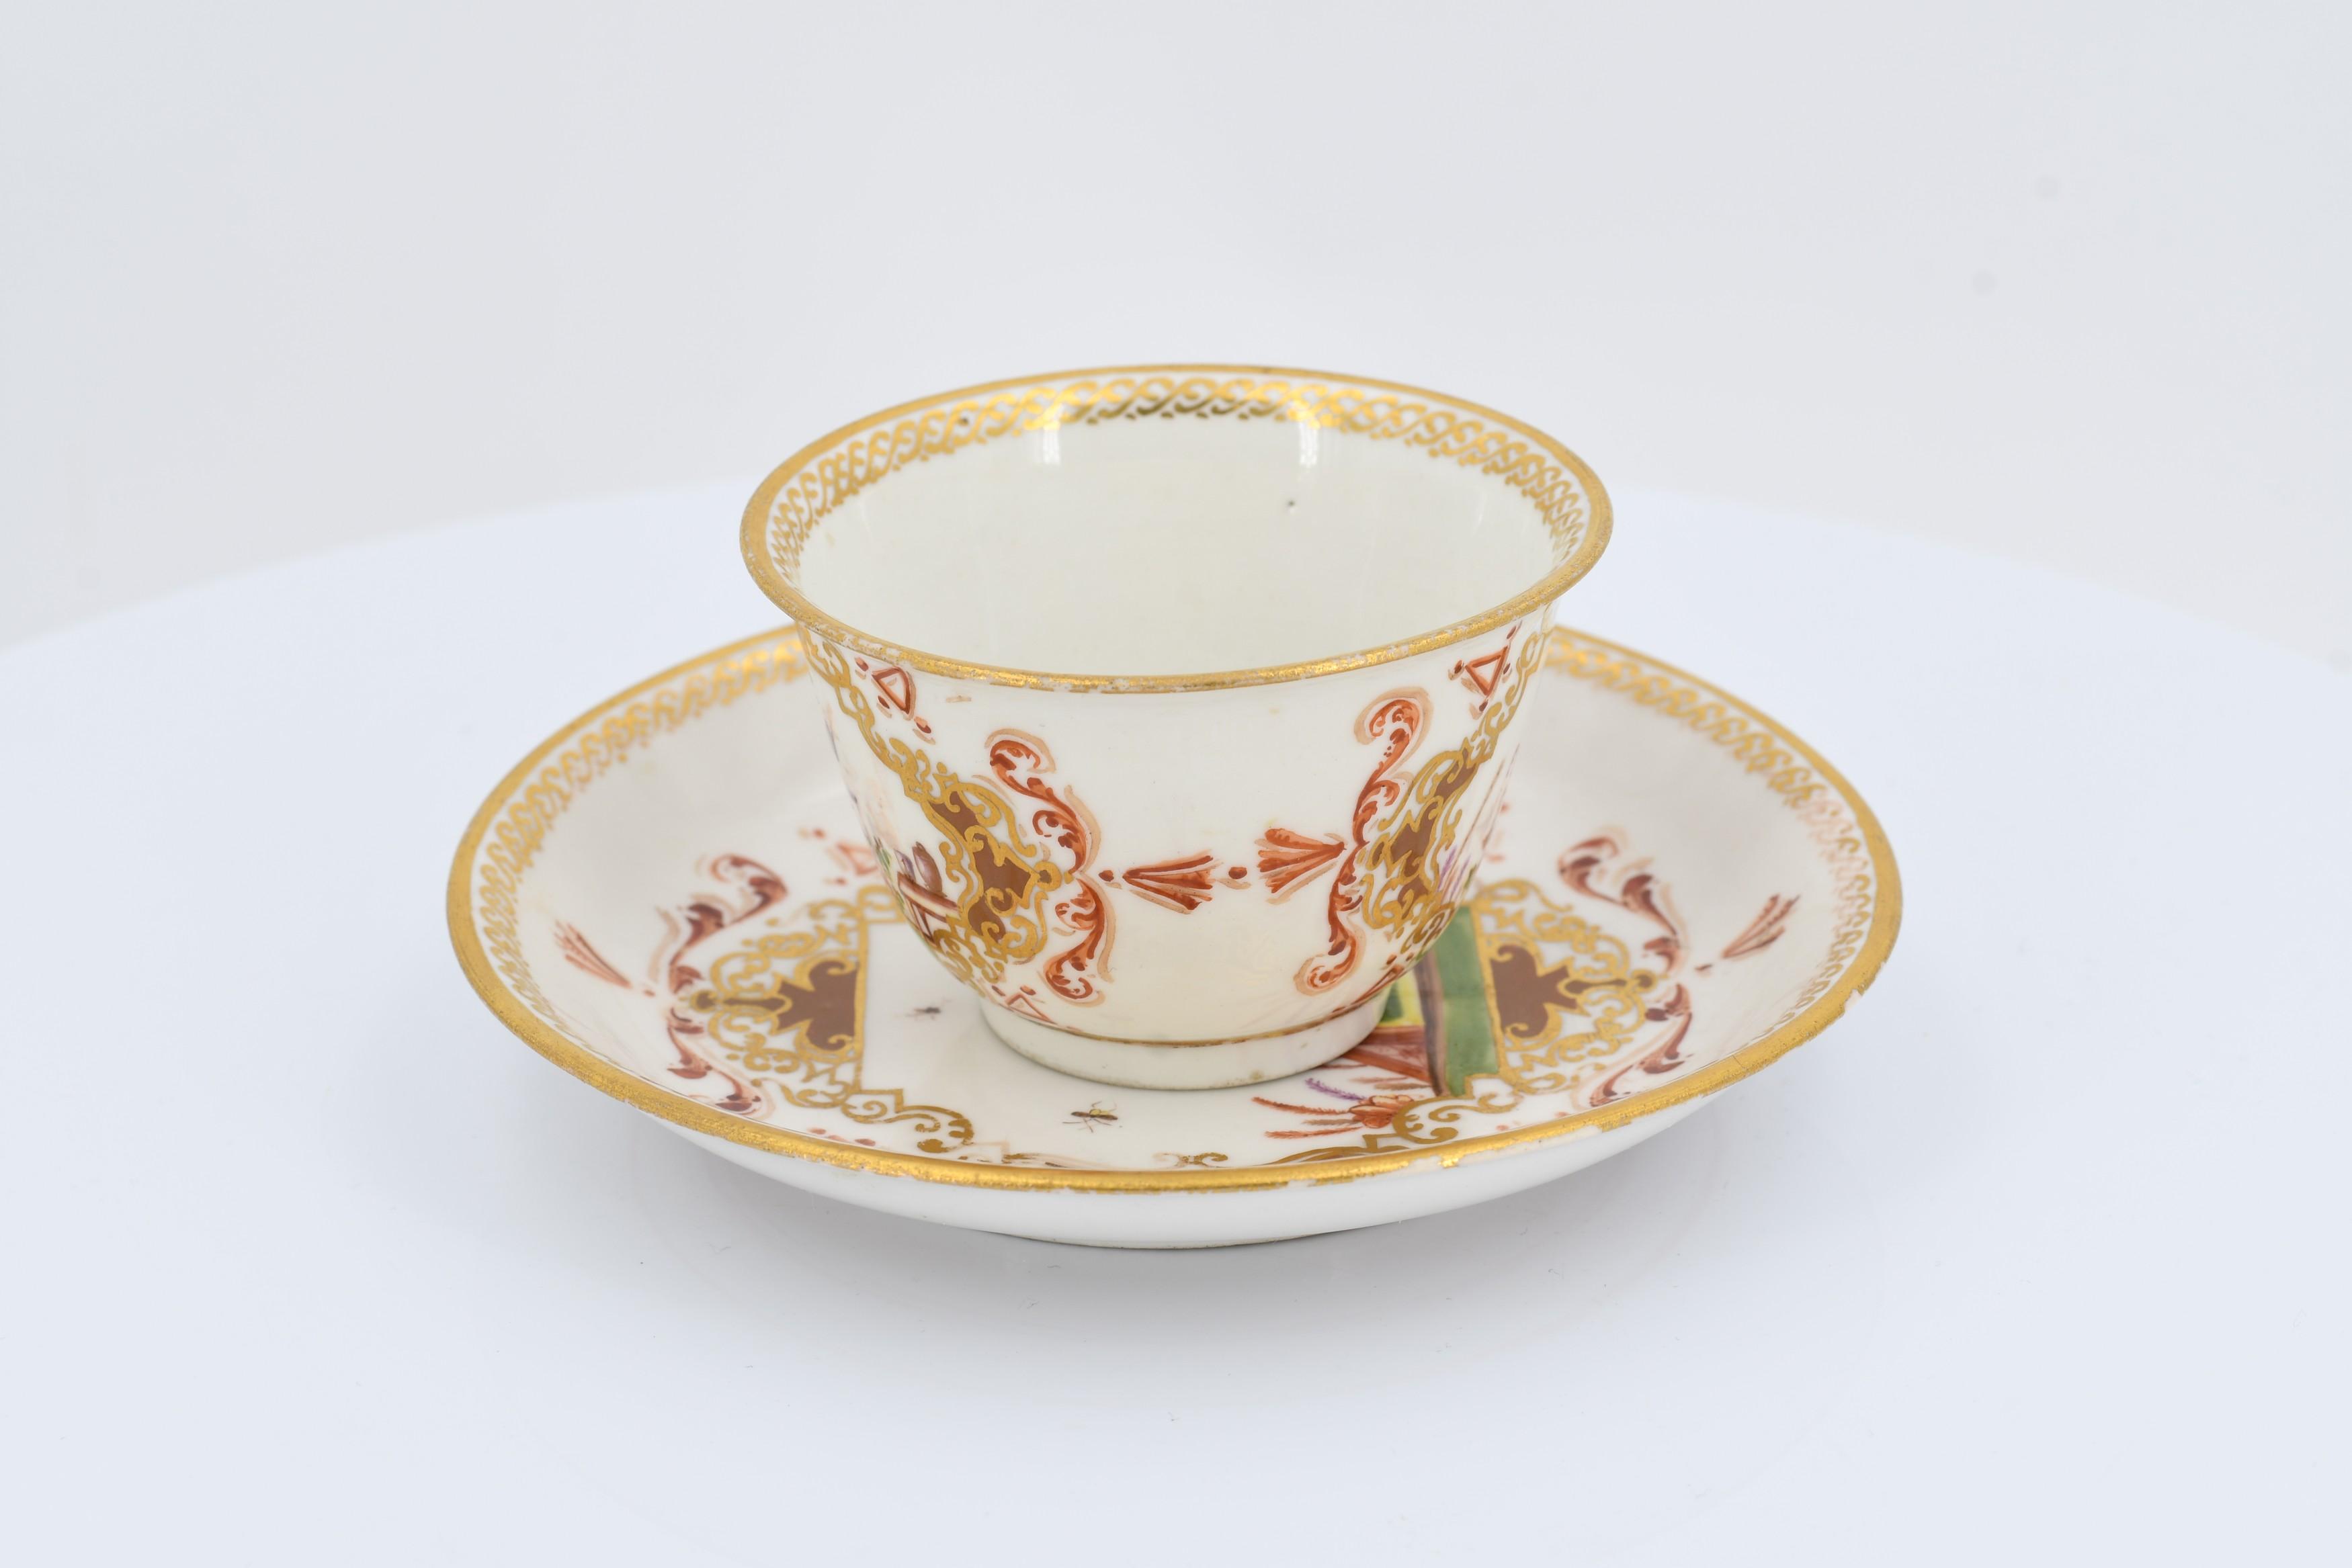 Tea bowl and saucer with chinoiseries - Image 5 of 7